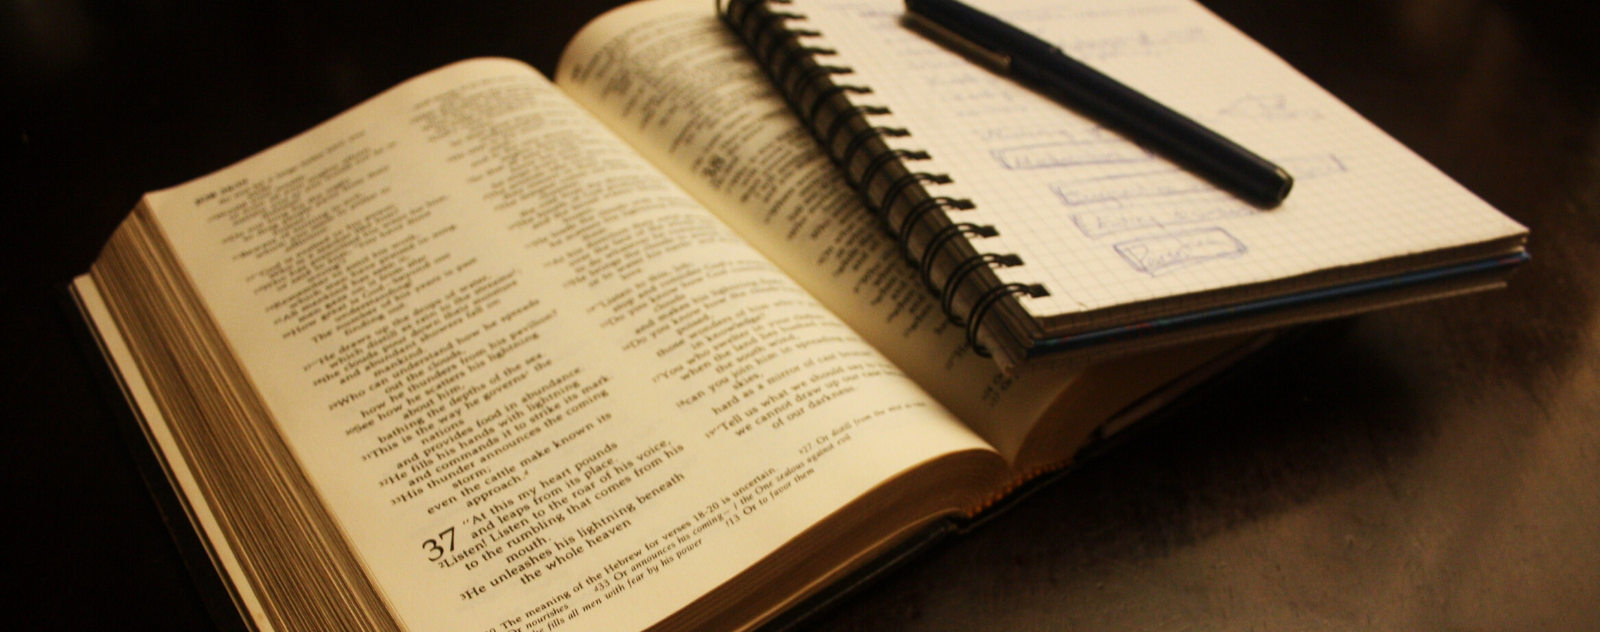 The Gospel of Mark for a Bible Study